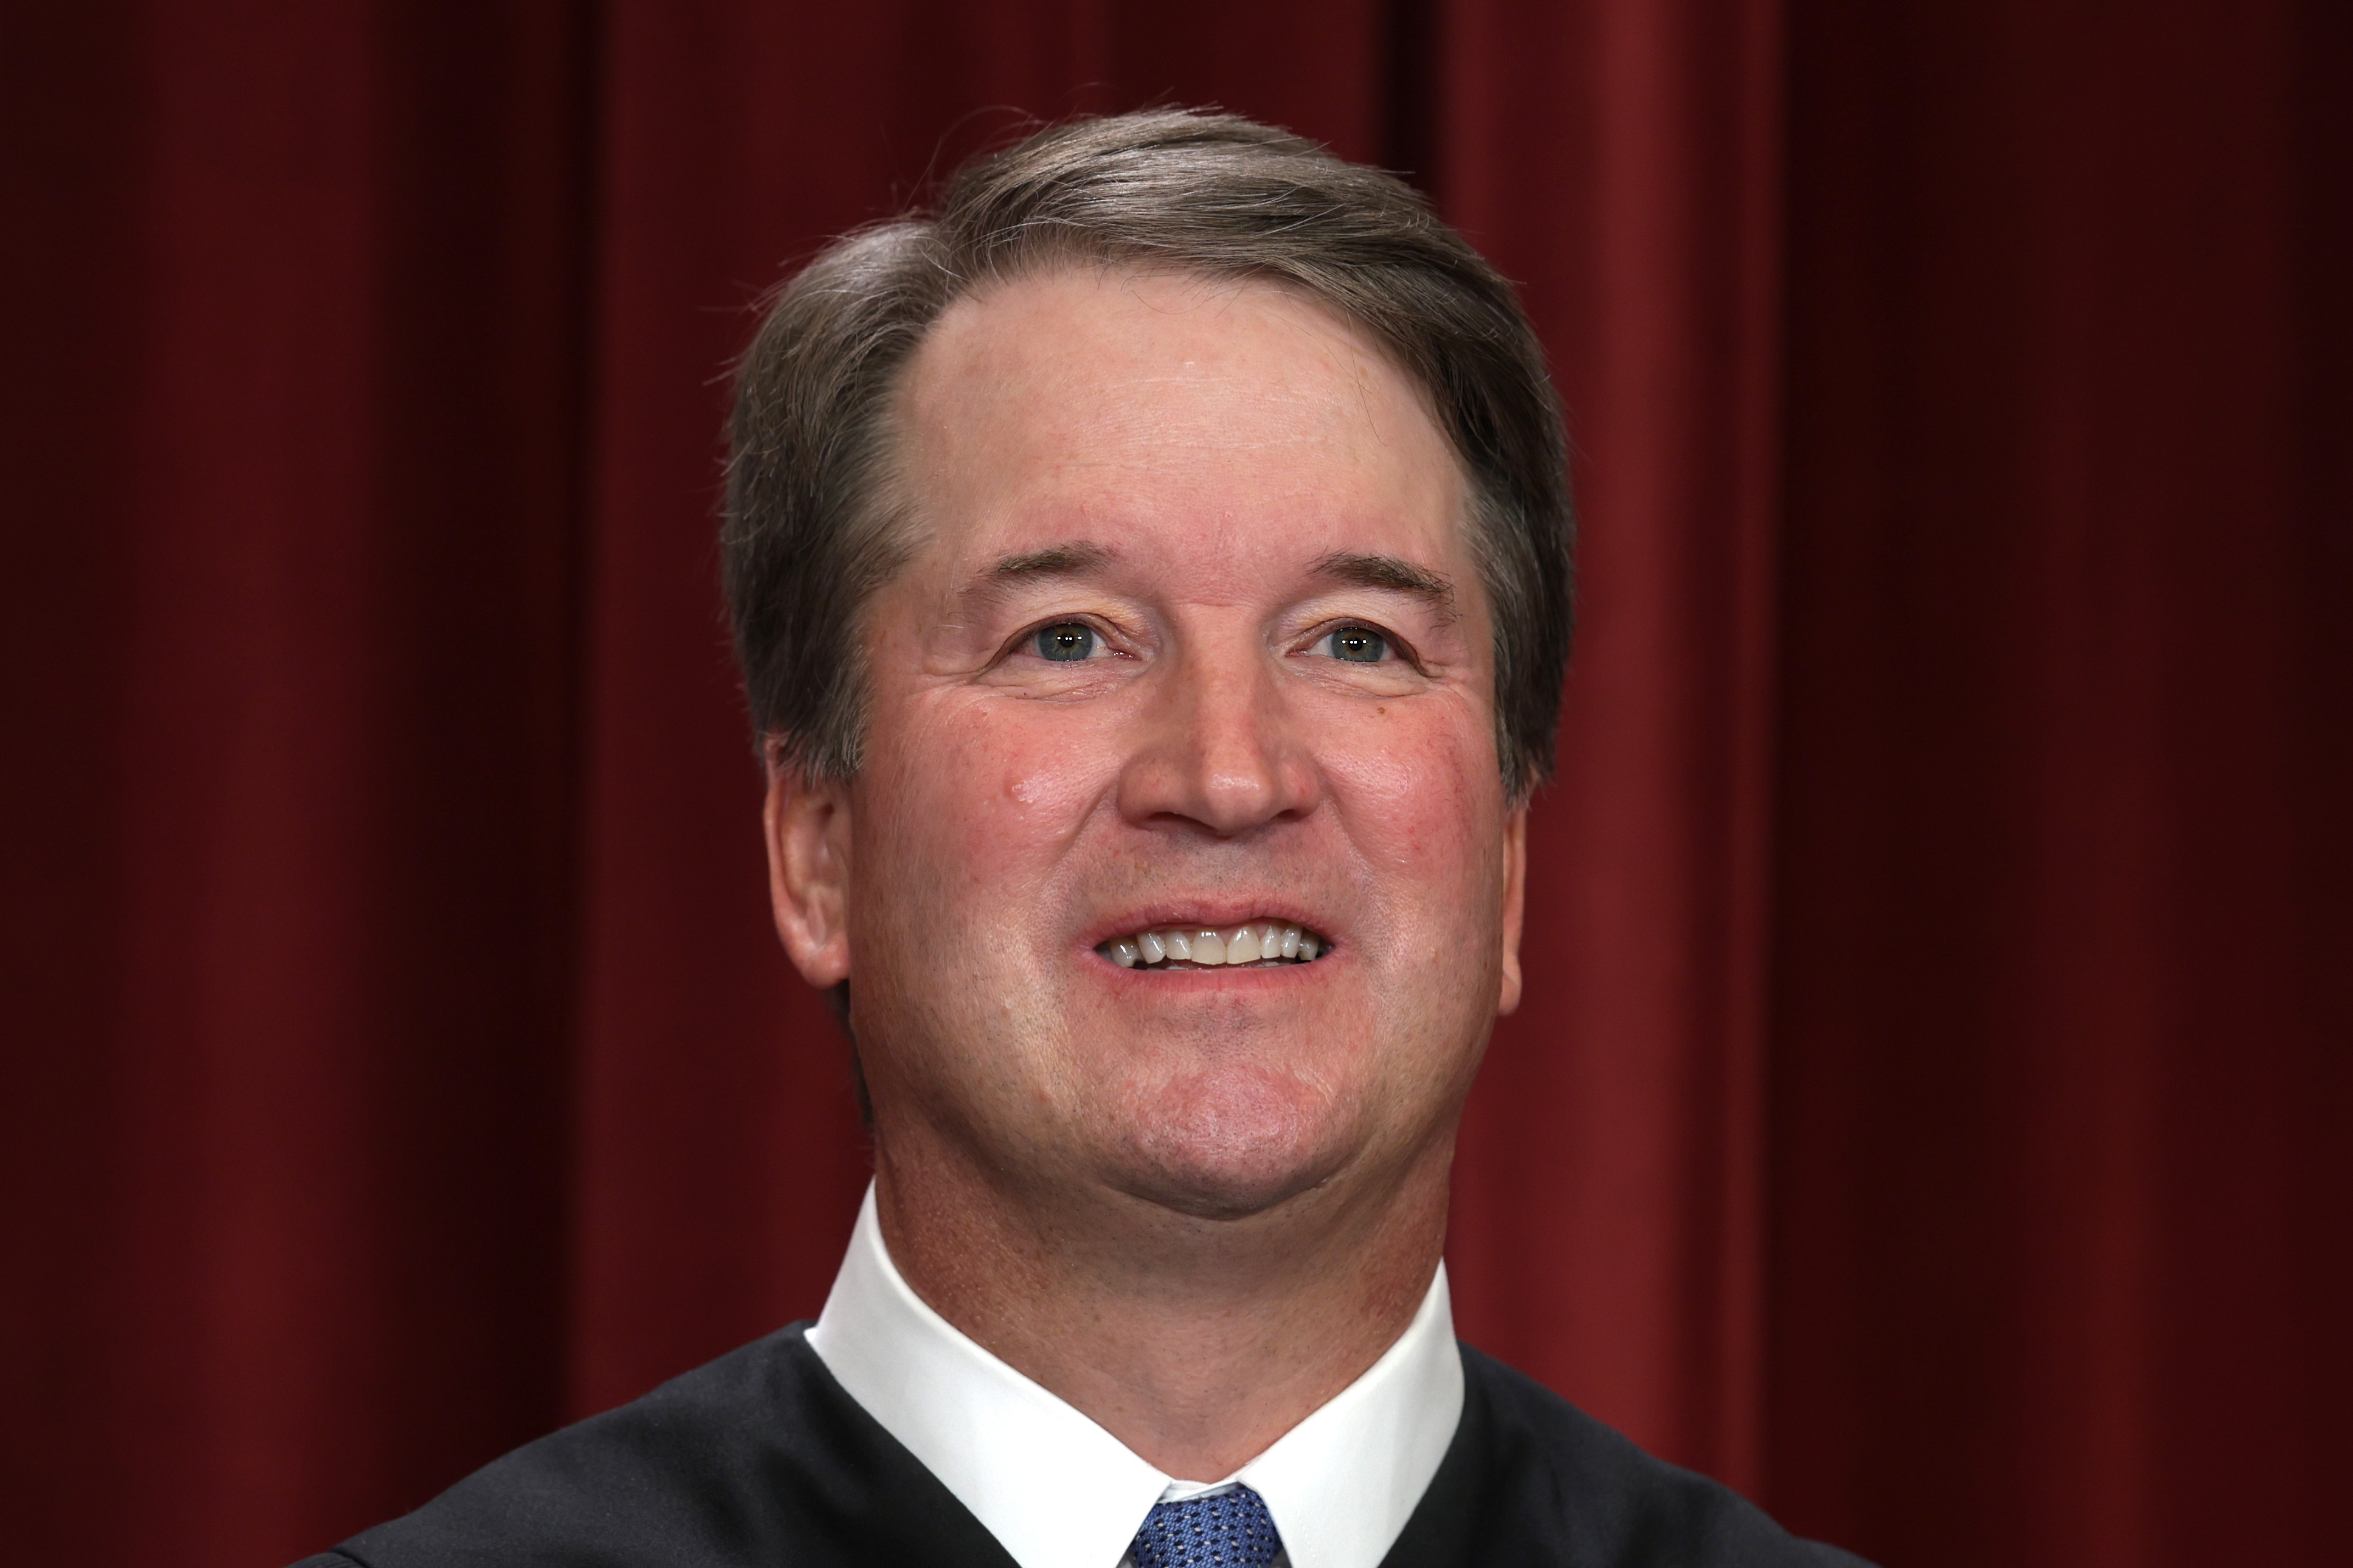 Justice Brett Kavanaugh poses for an official portrait at the Supreme Court in Washington, DC, in 2022.